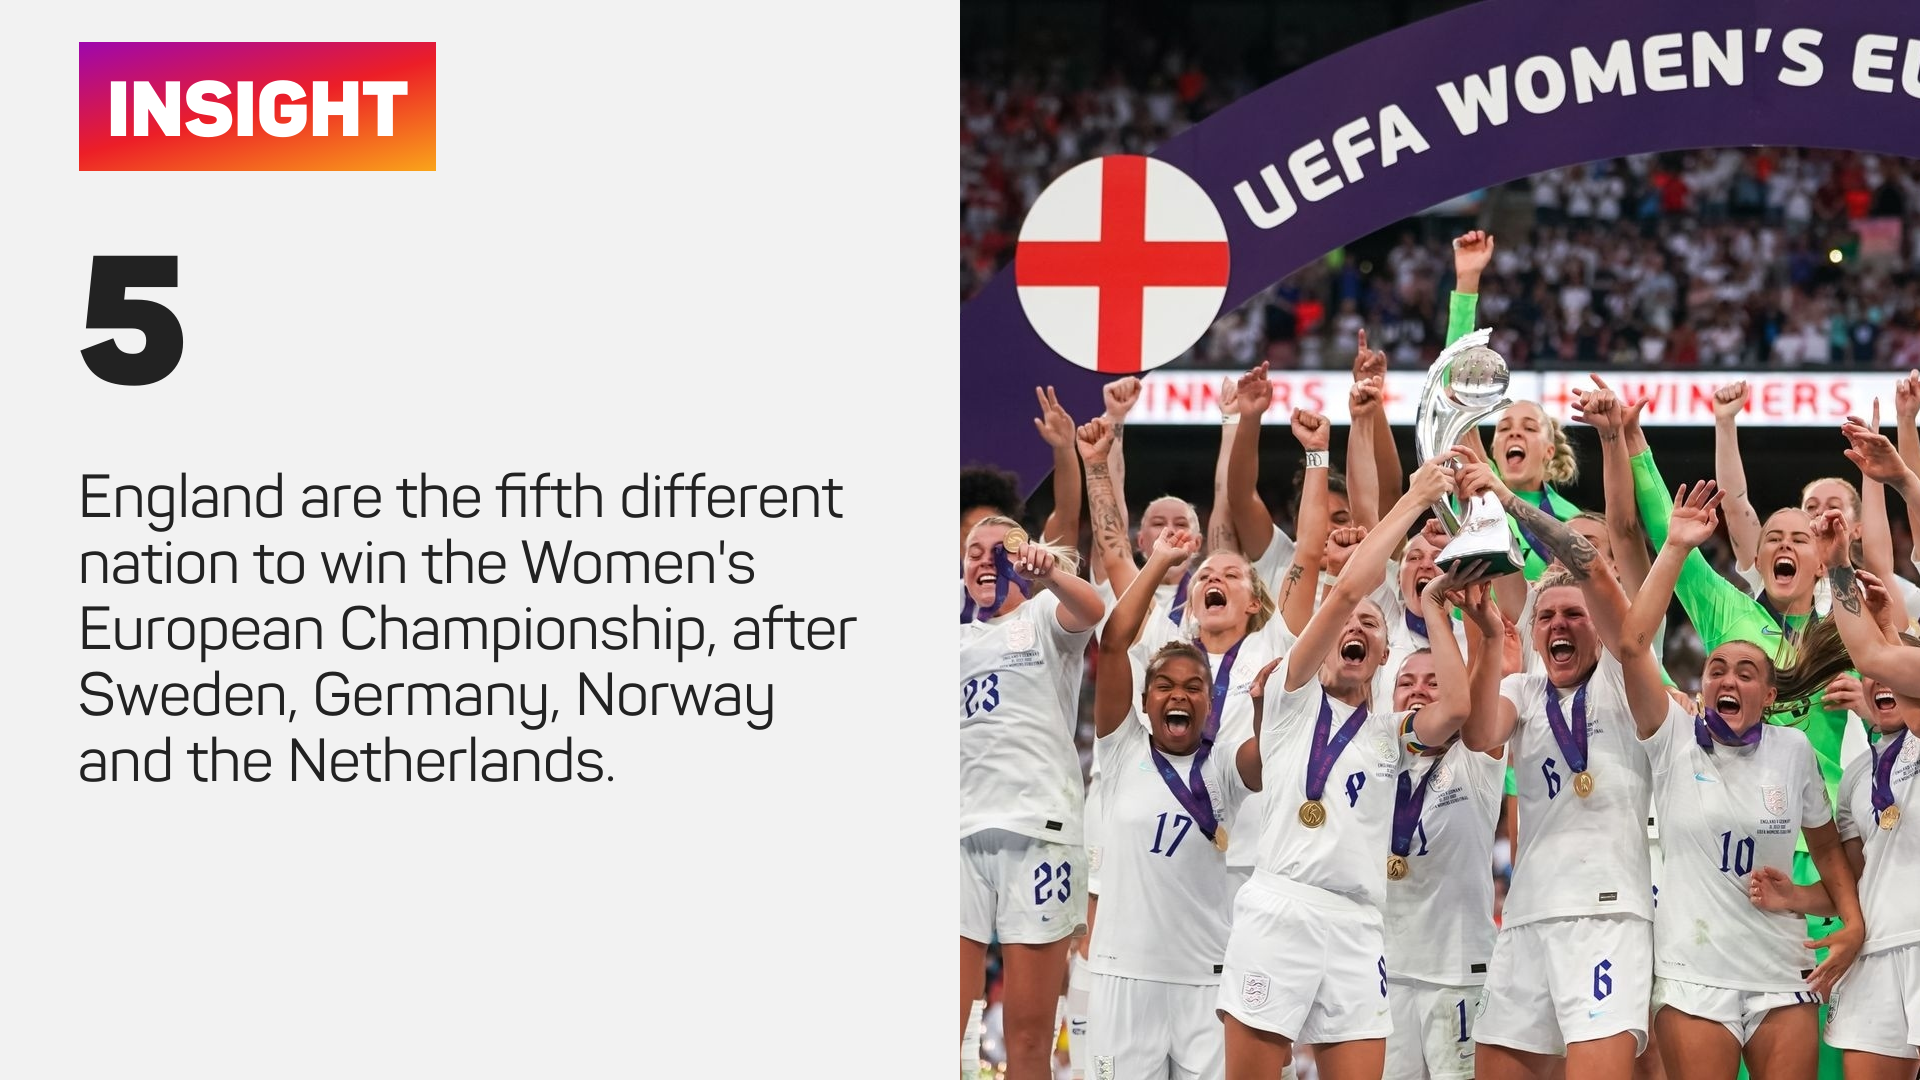 England are the fifth side to win the Women's Euros